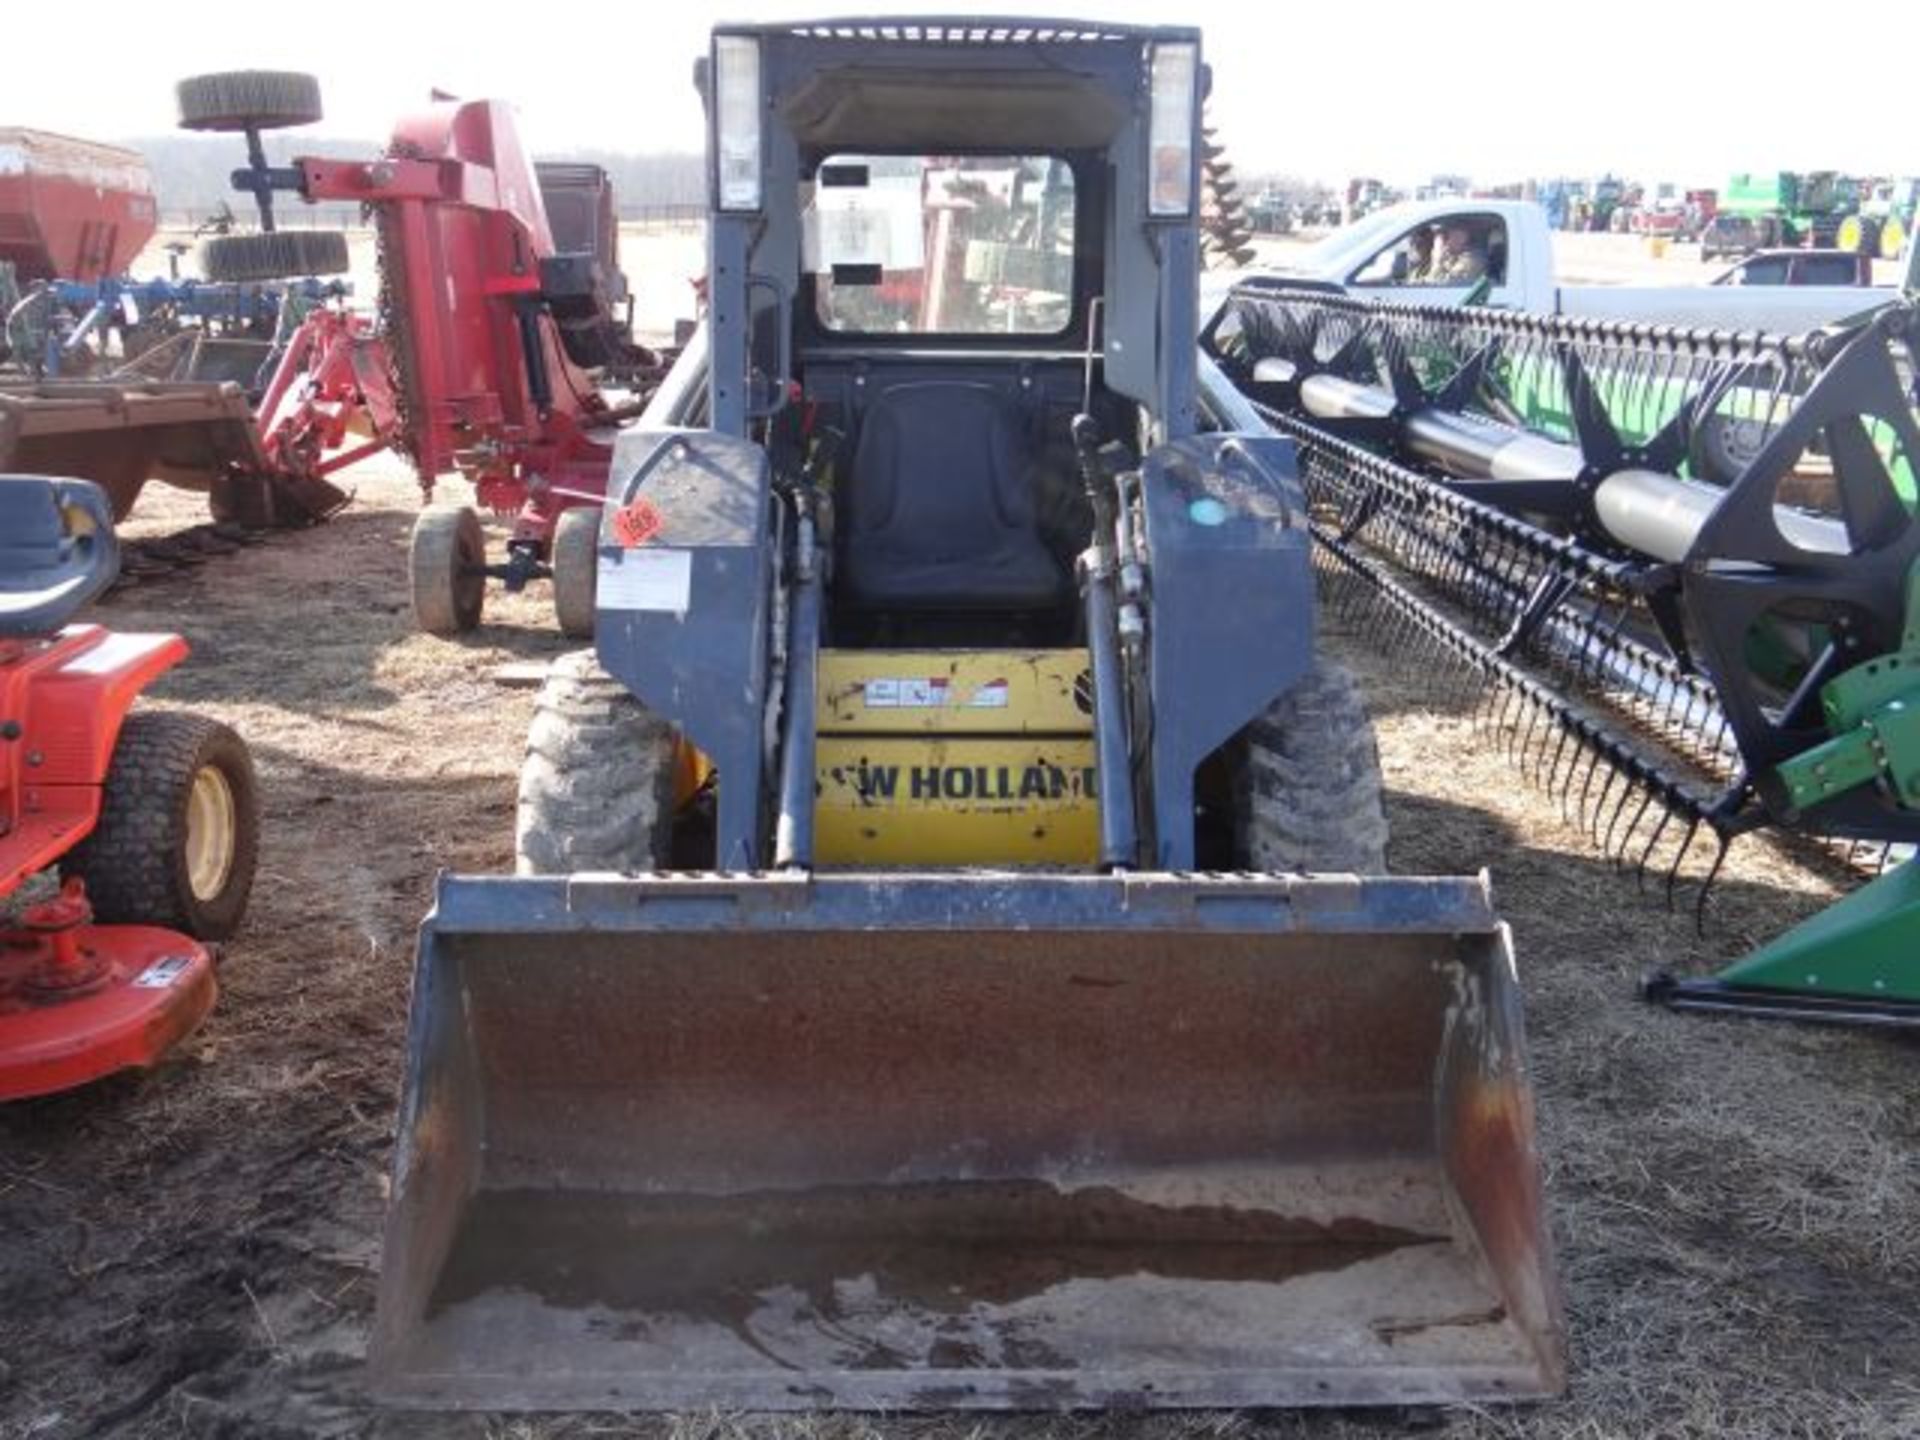 NH L150 Skid Loader, 2008 200 hrs, All New Oil & Filters, Excellent Condition, Aux Hyd, Good Tires - Image 3 of 5